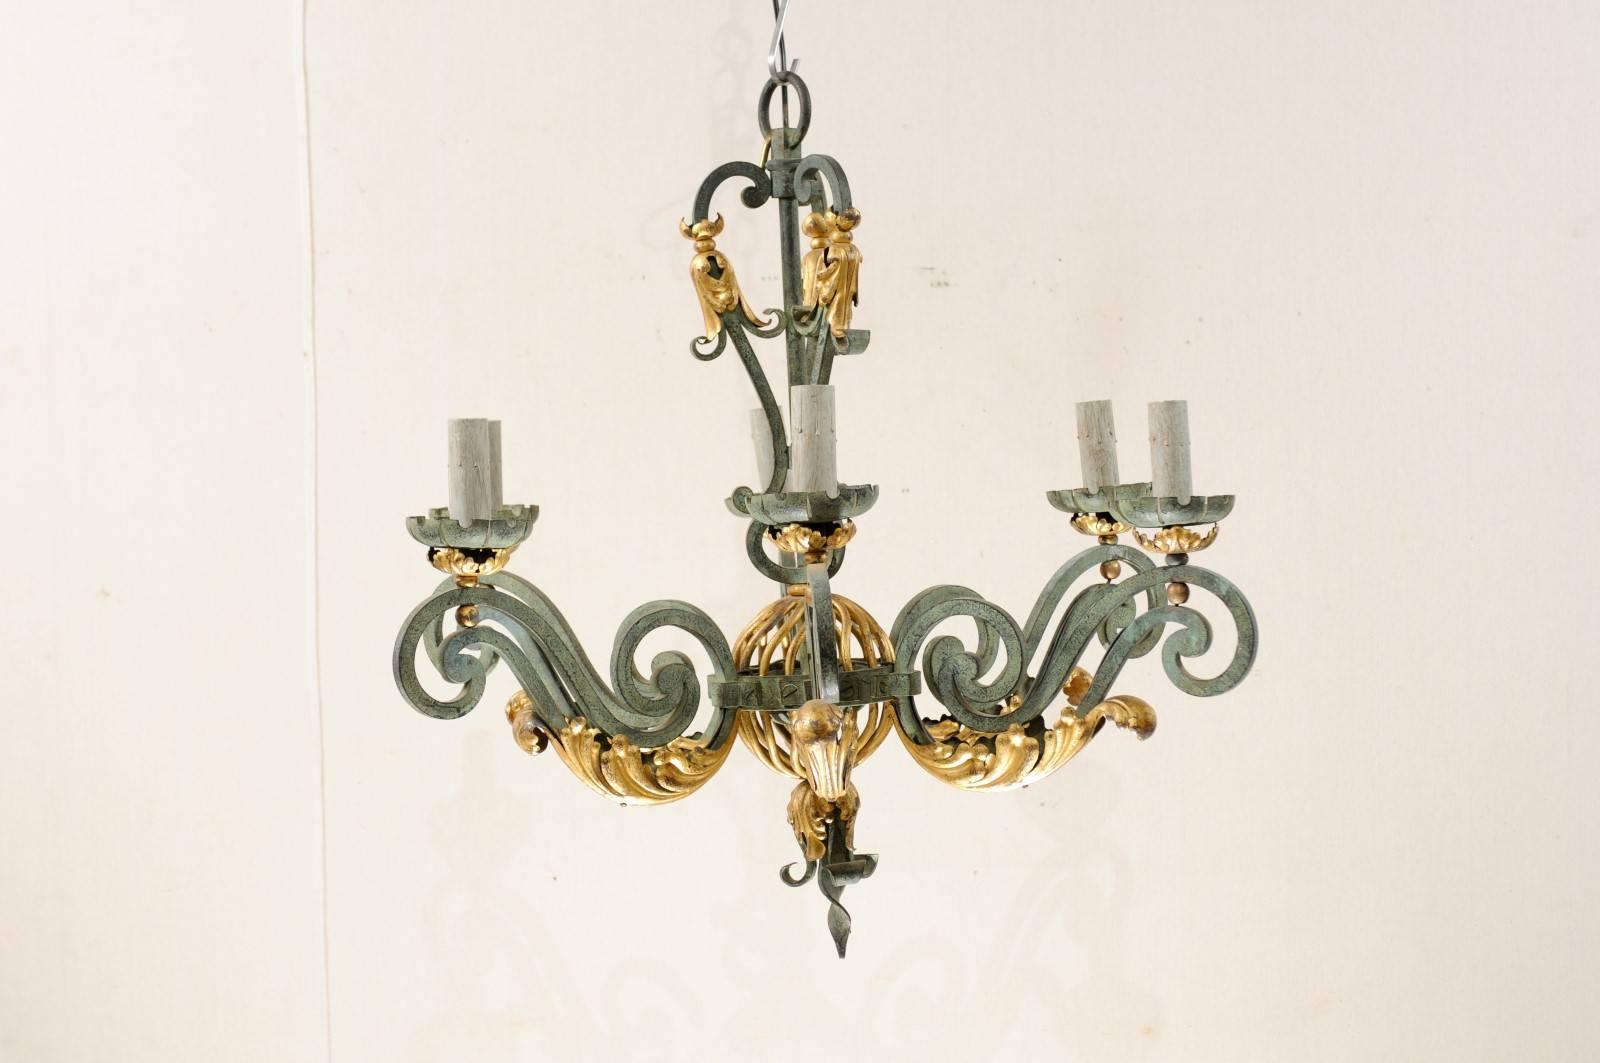 Patinated Elegant French Verdigris Six-Light Chandelier of Forged Iron with Gilt Accent For Sale